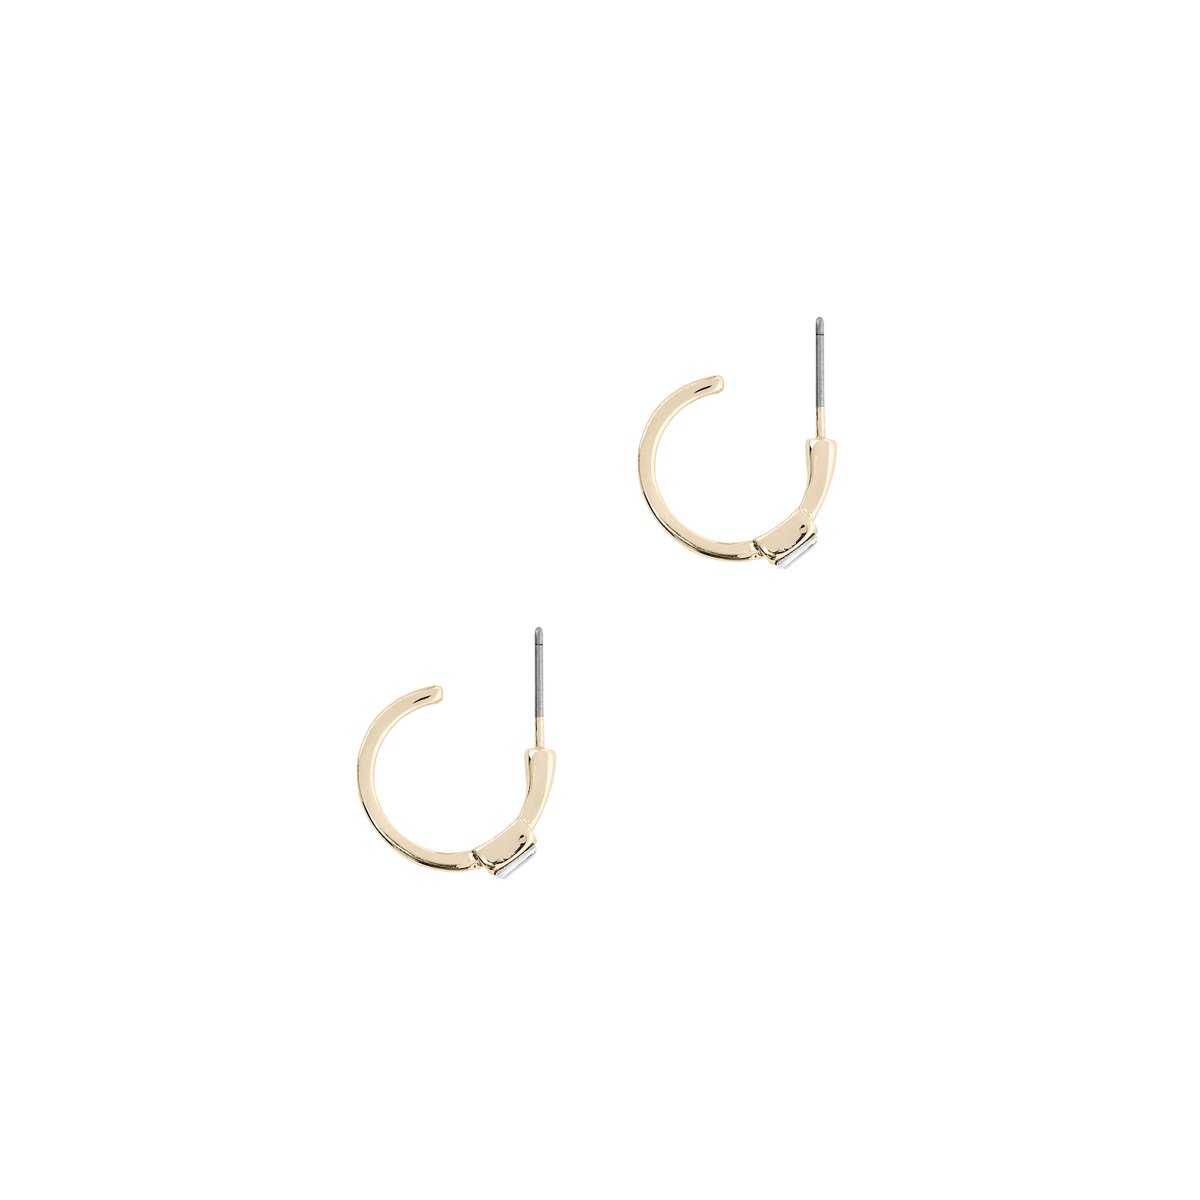 Uncommon James: Hold Me Close Earrings - Gold